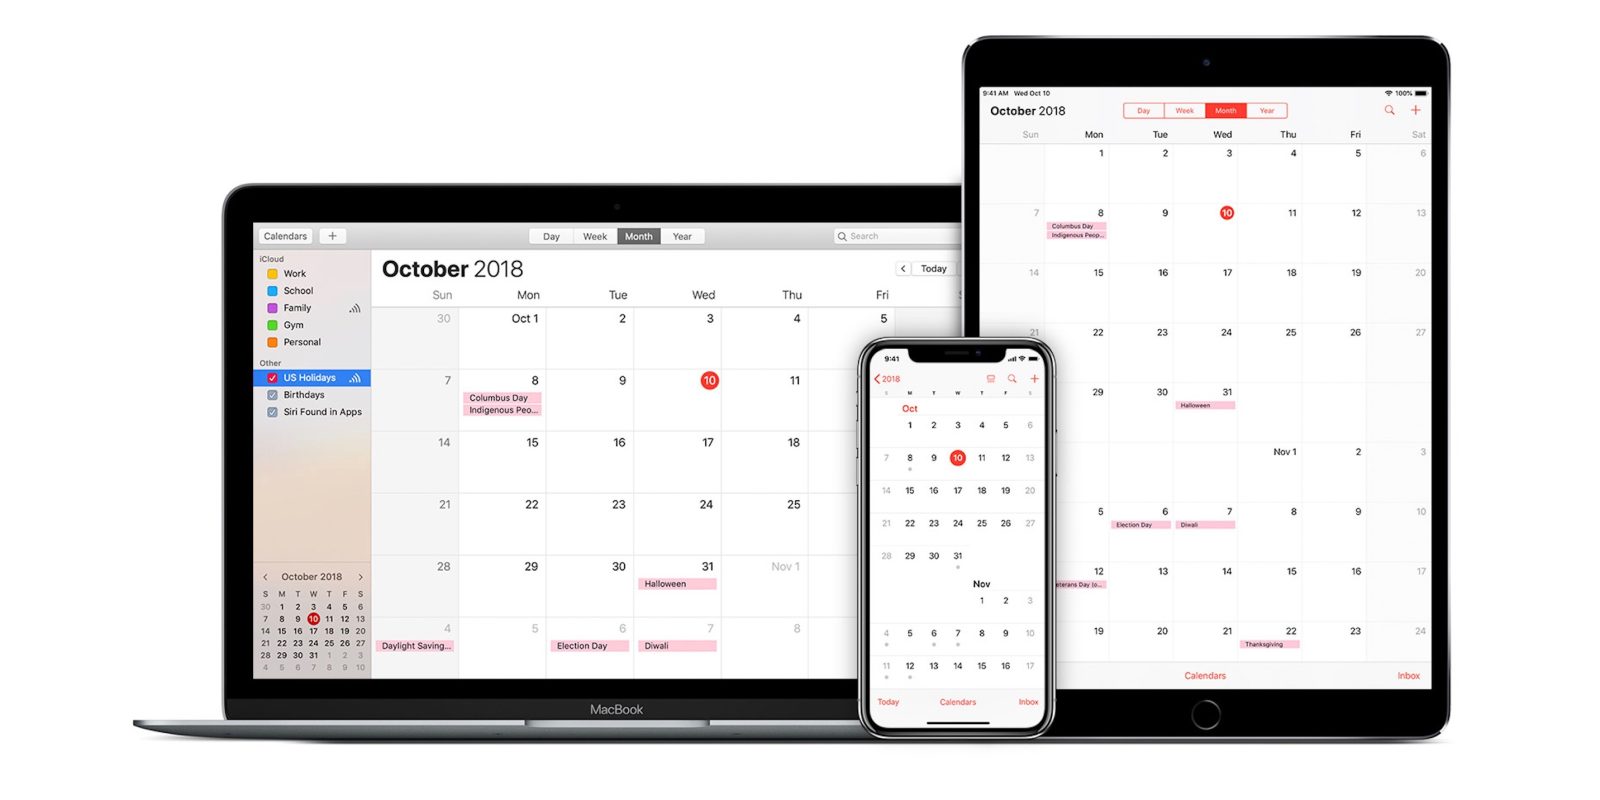 How to report and remove iCloud calendar spam 9to5Mac